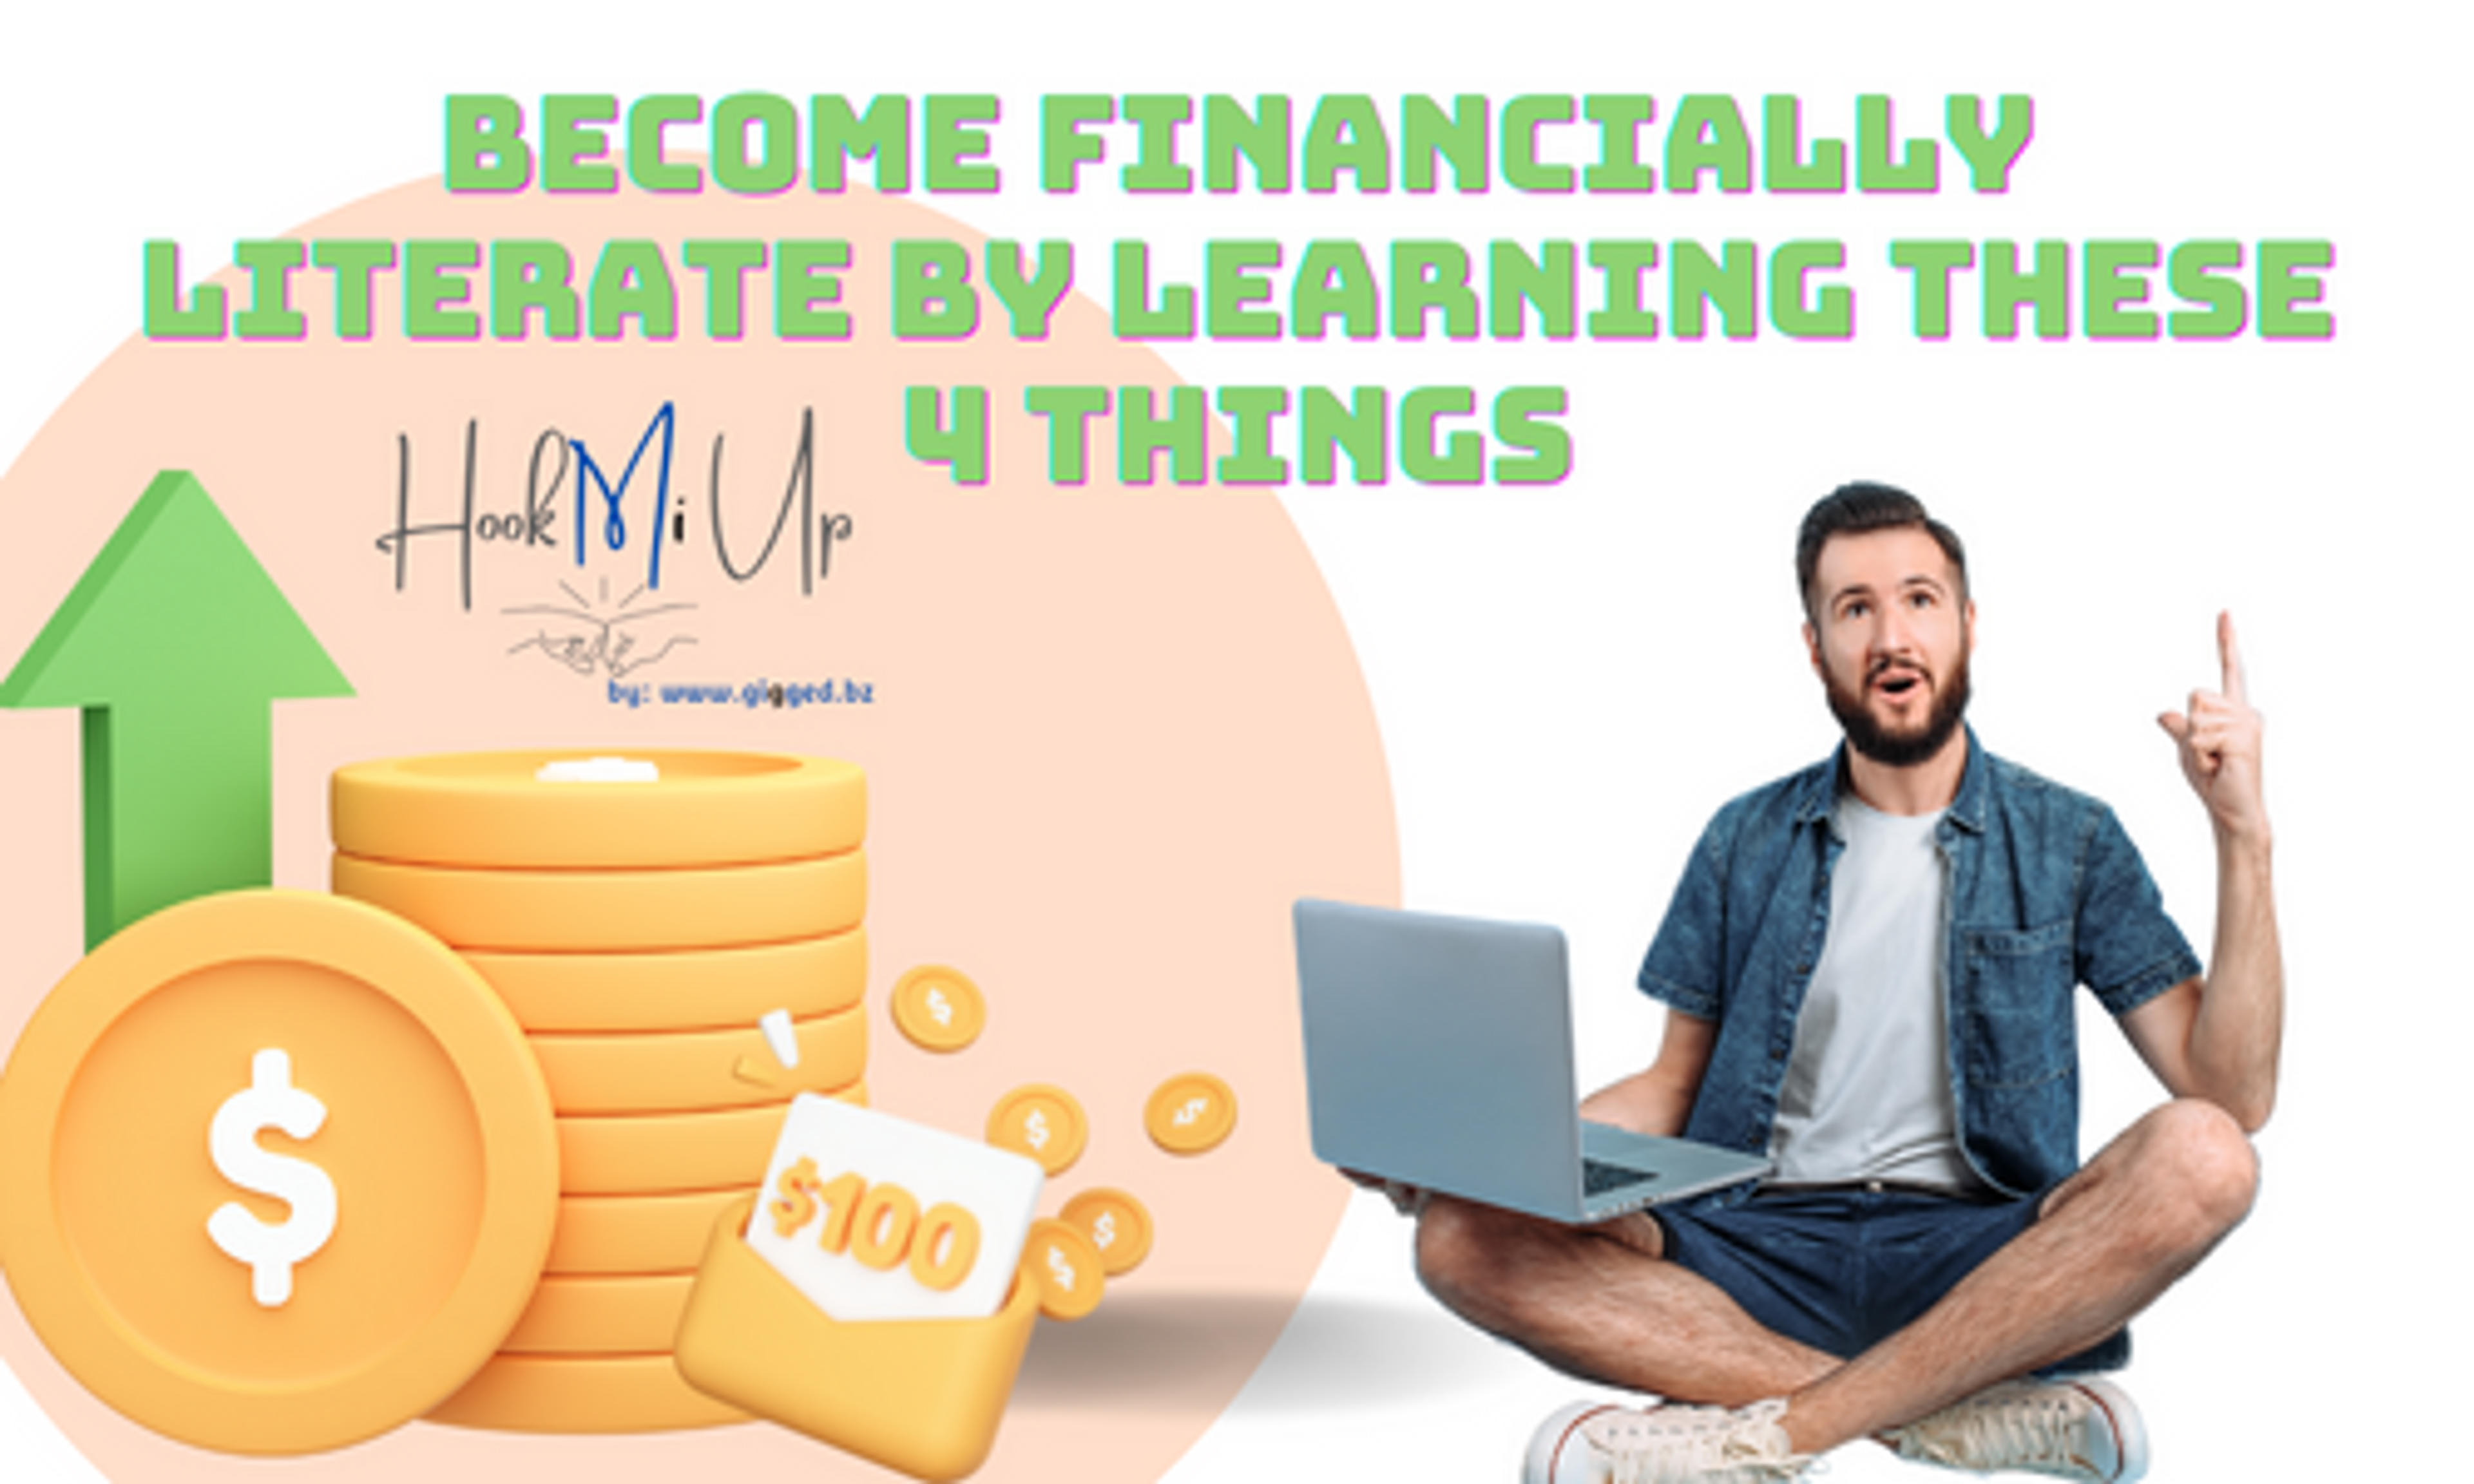 How to become financially literate